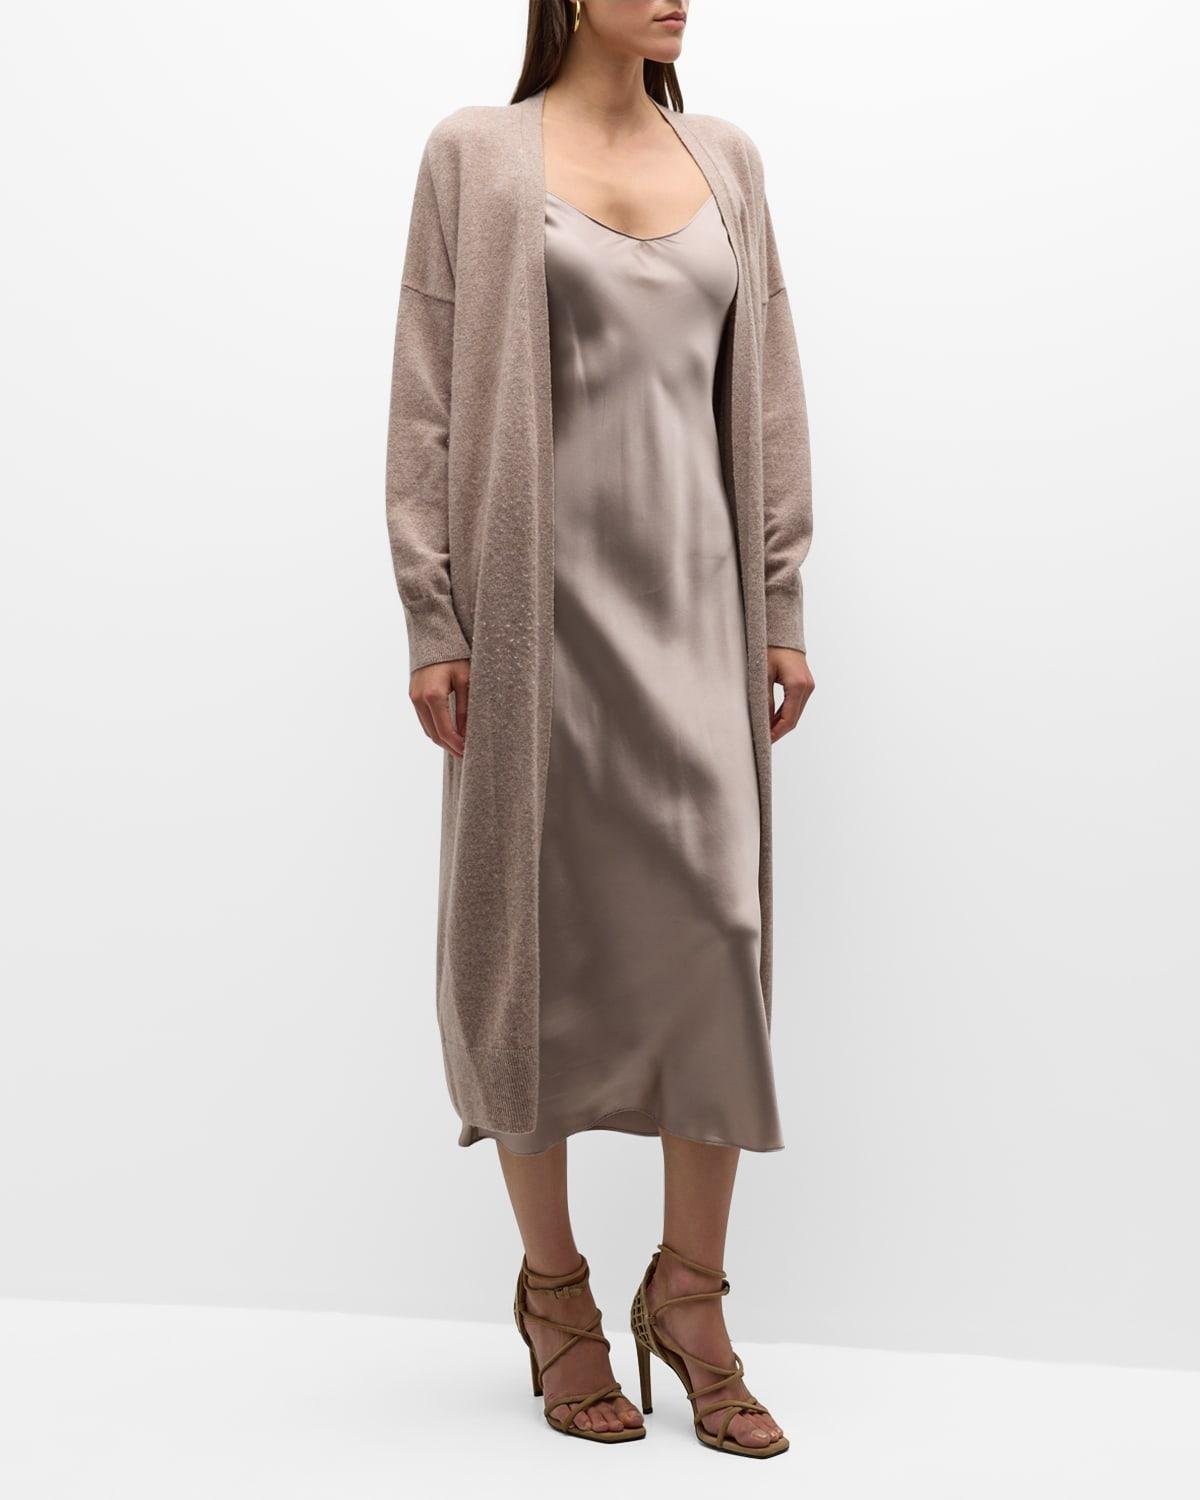 Cashmere Duster by SABLYN